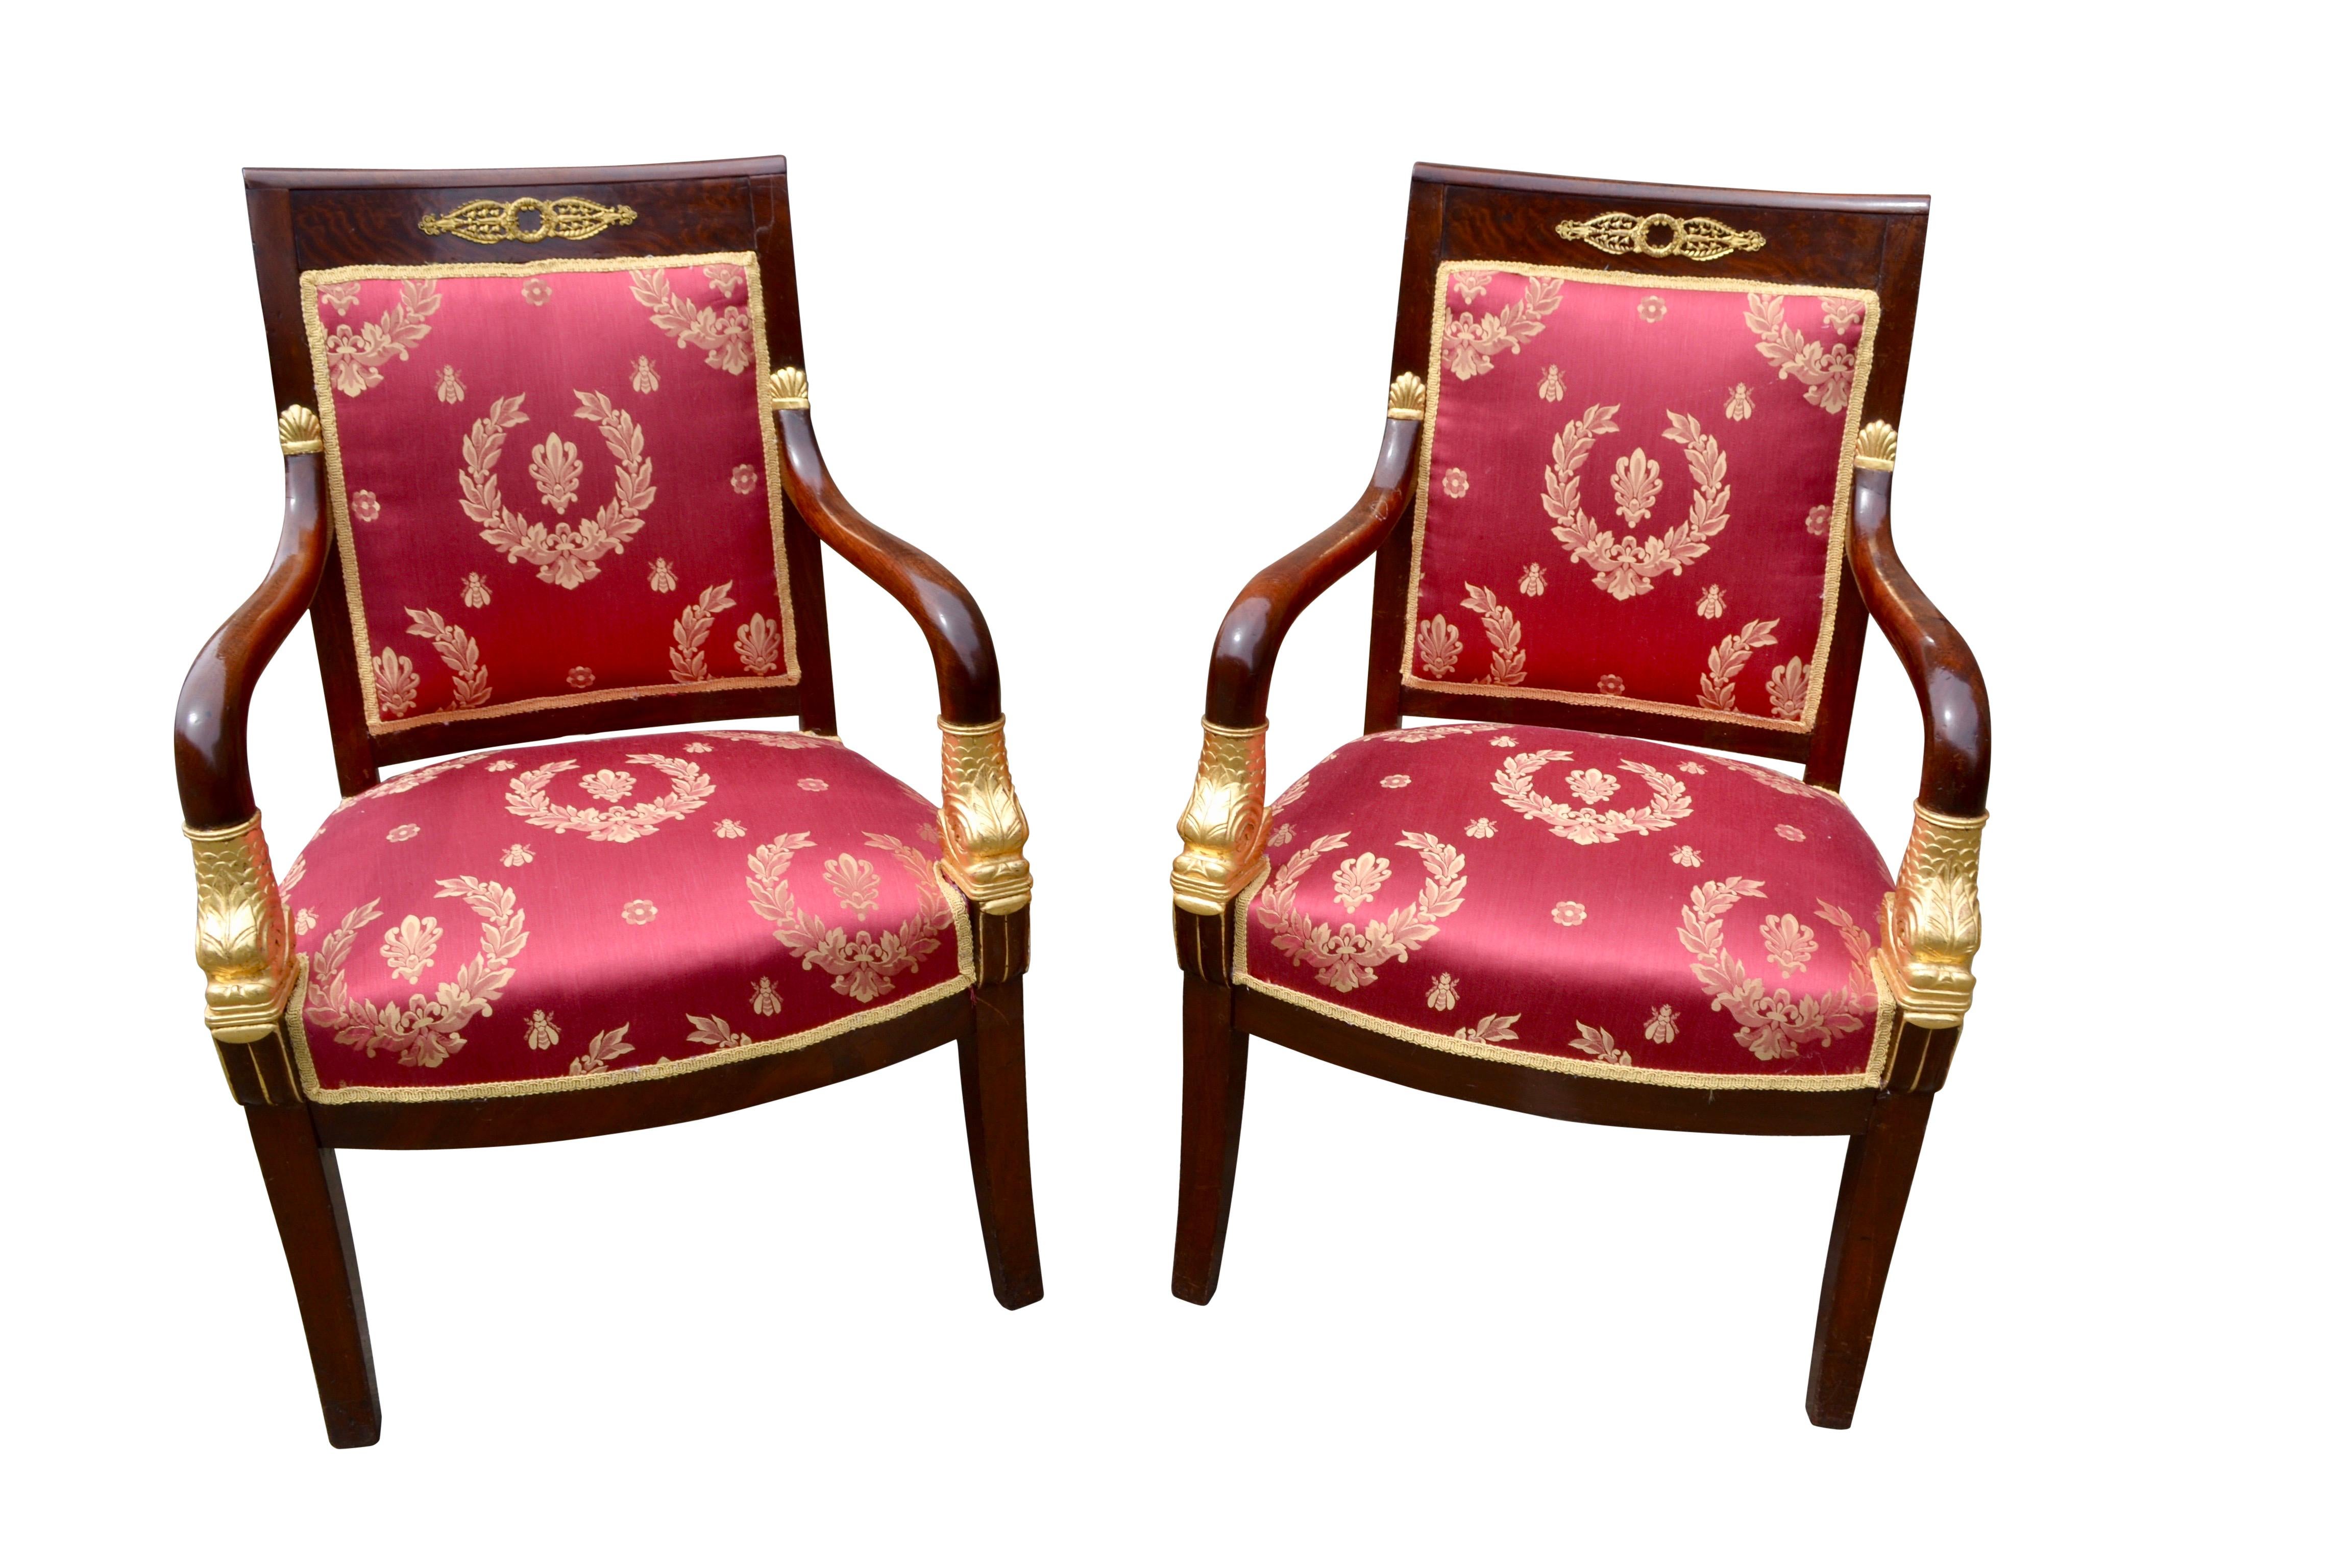 Hand-Crafted Pair of French Empire Mahogany Armchairs Accented by Gilded Dolphin Heads